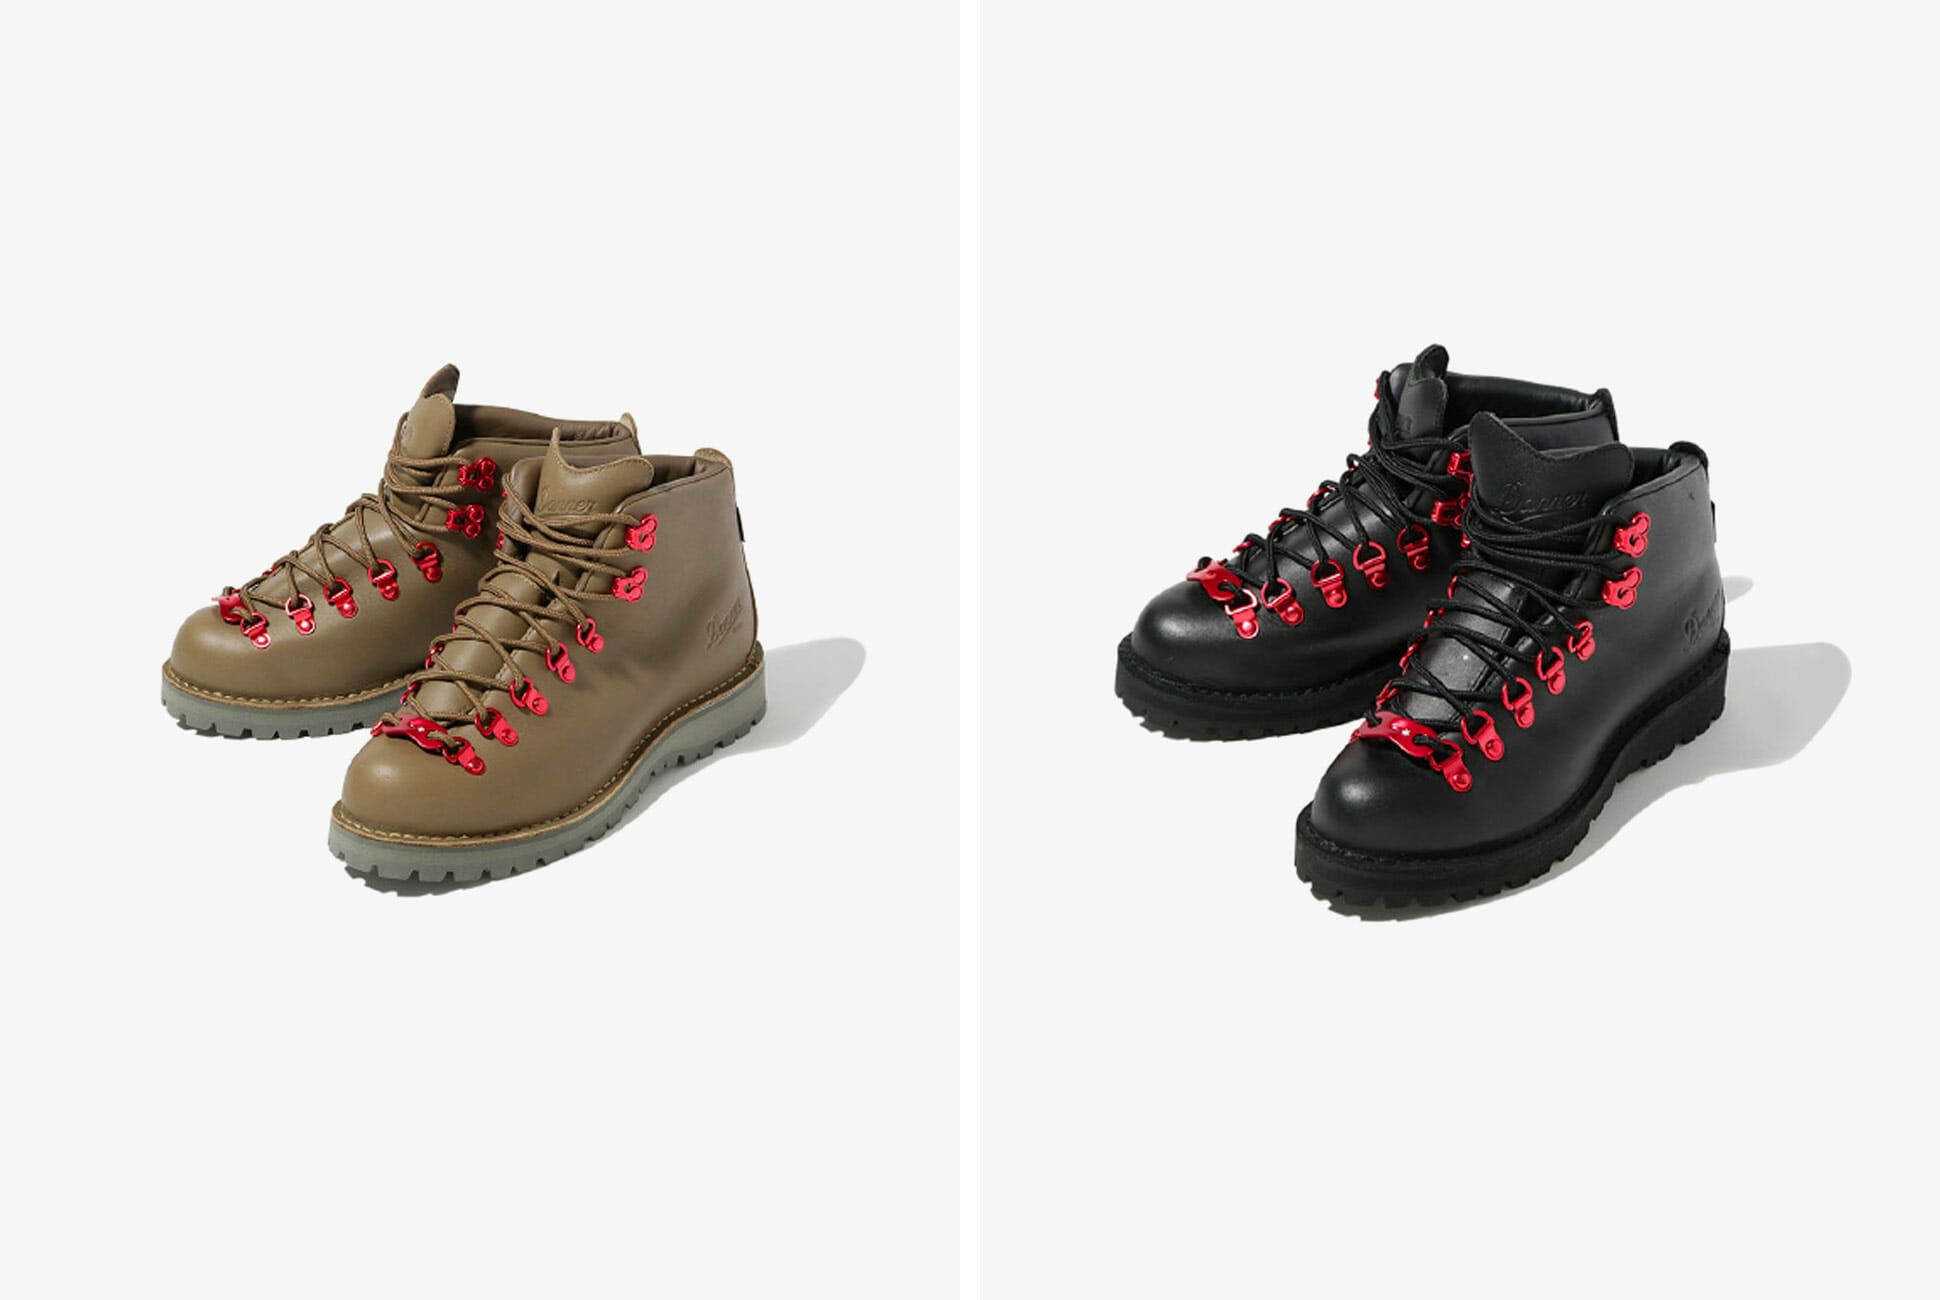 It Won't Be Easy to Get These Ultra-Stylish Hiking Boots